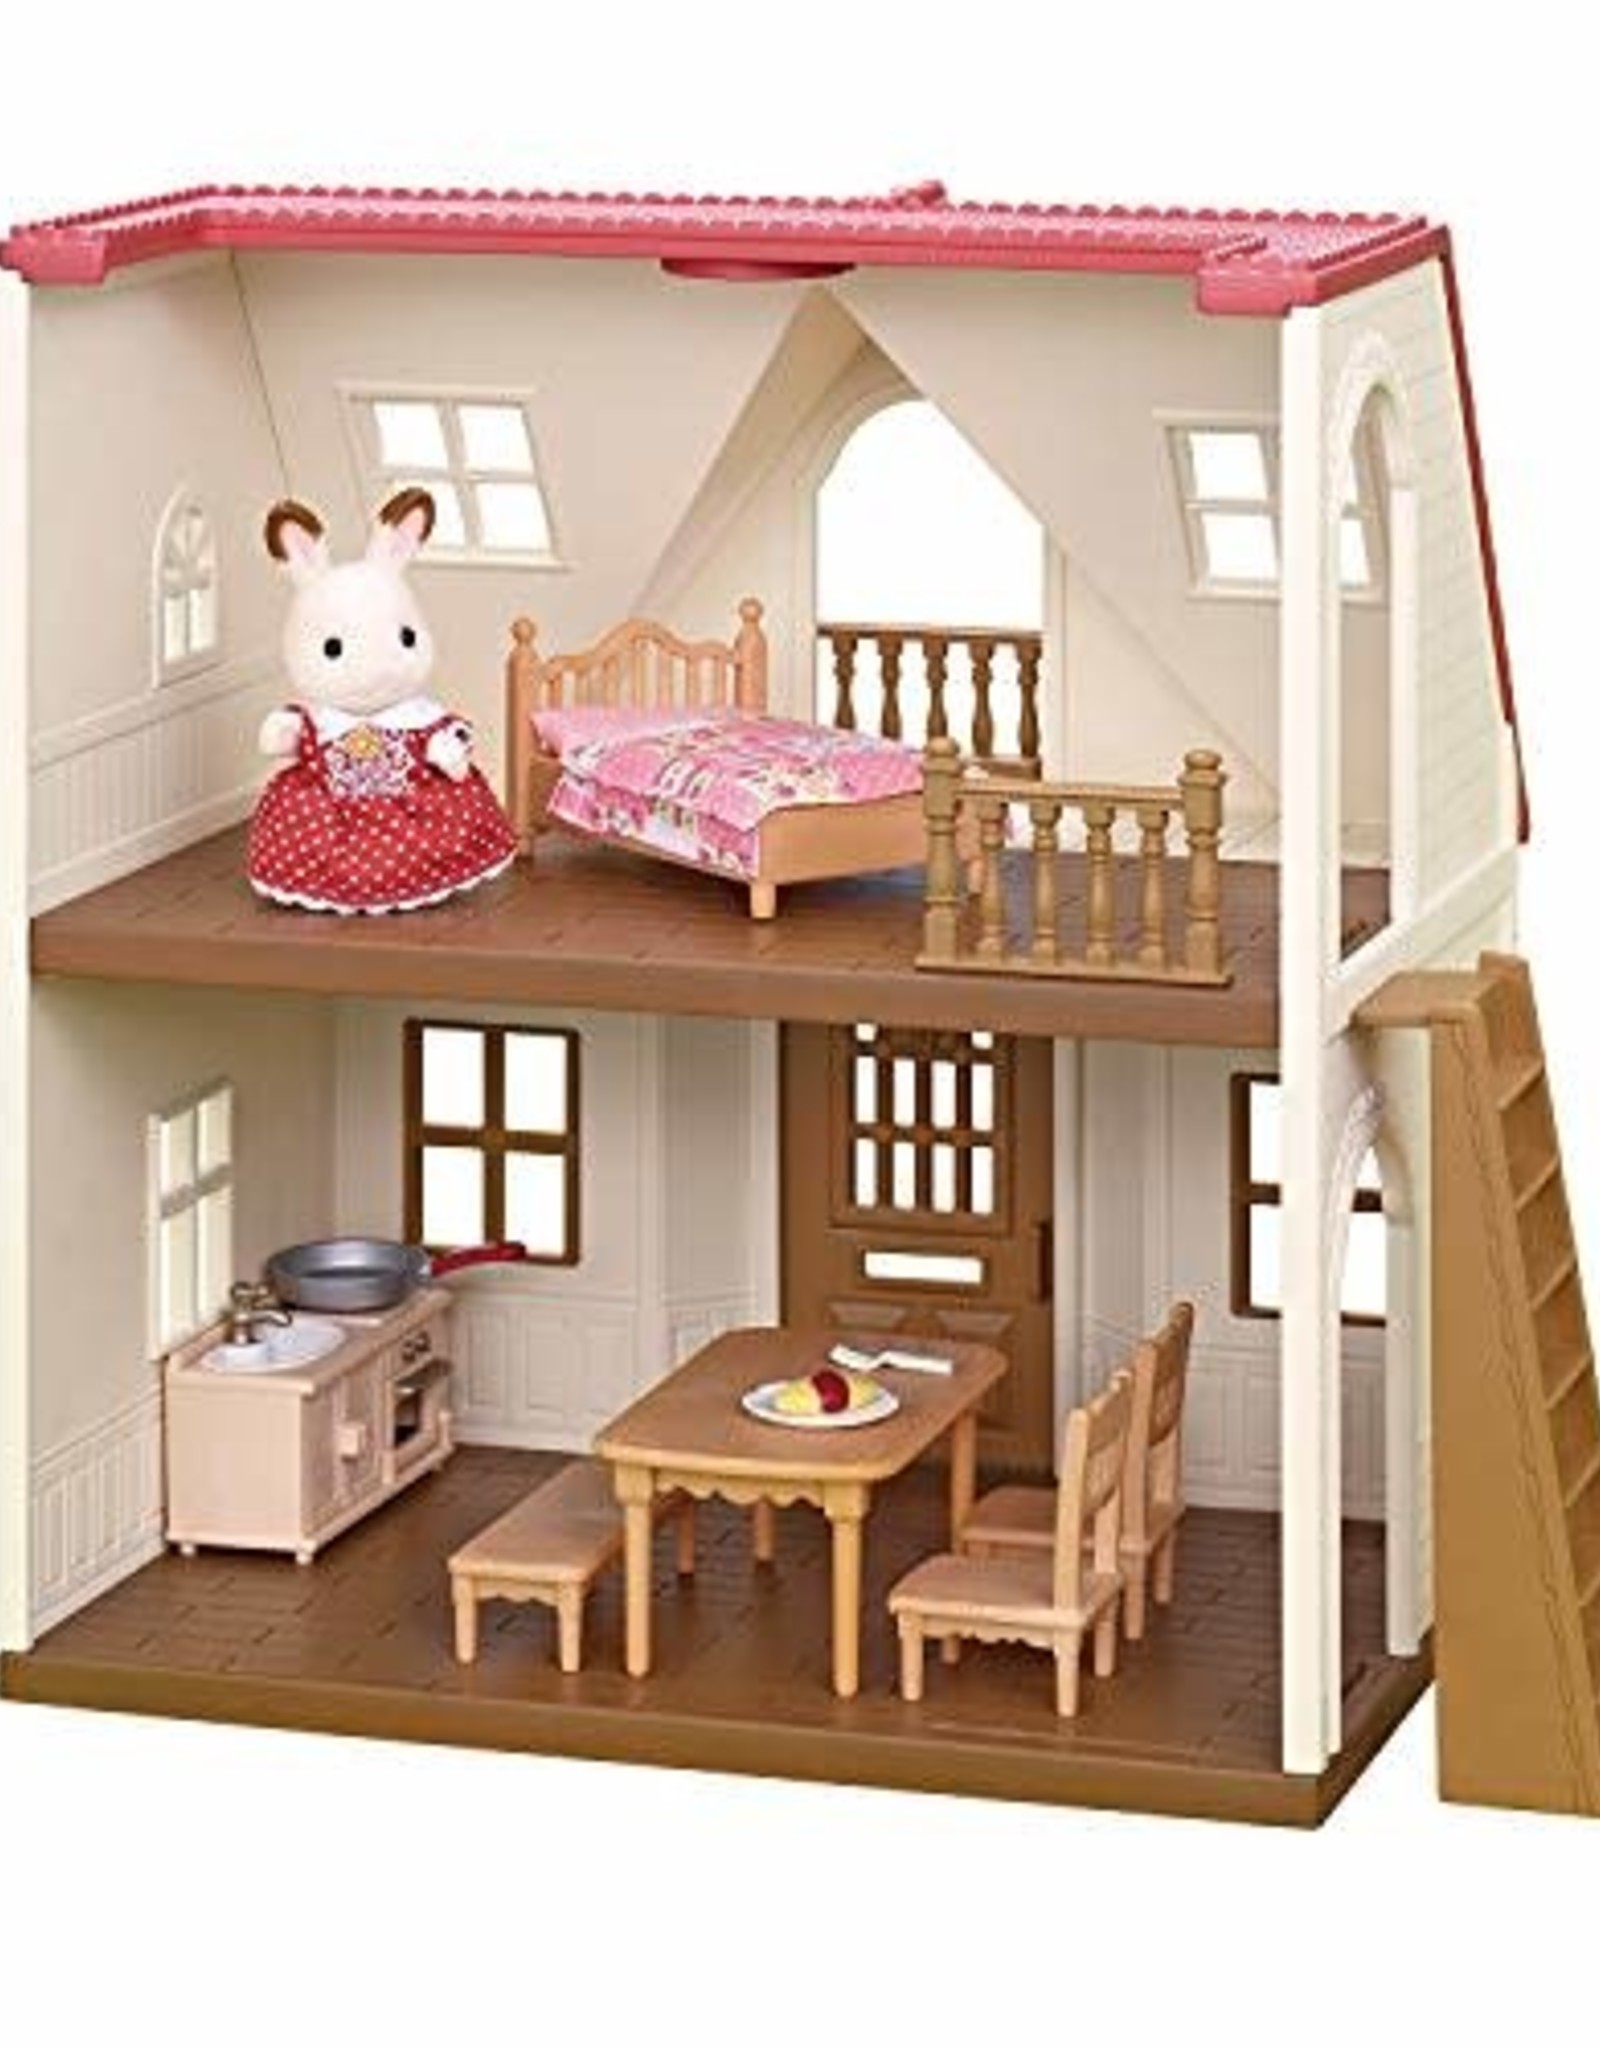 INTERNATIONAL PLAYTHINGS EPOCH RED ROOF COZY COTTAGE STARTER HOME